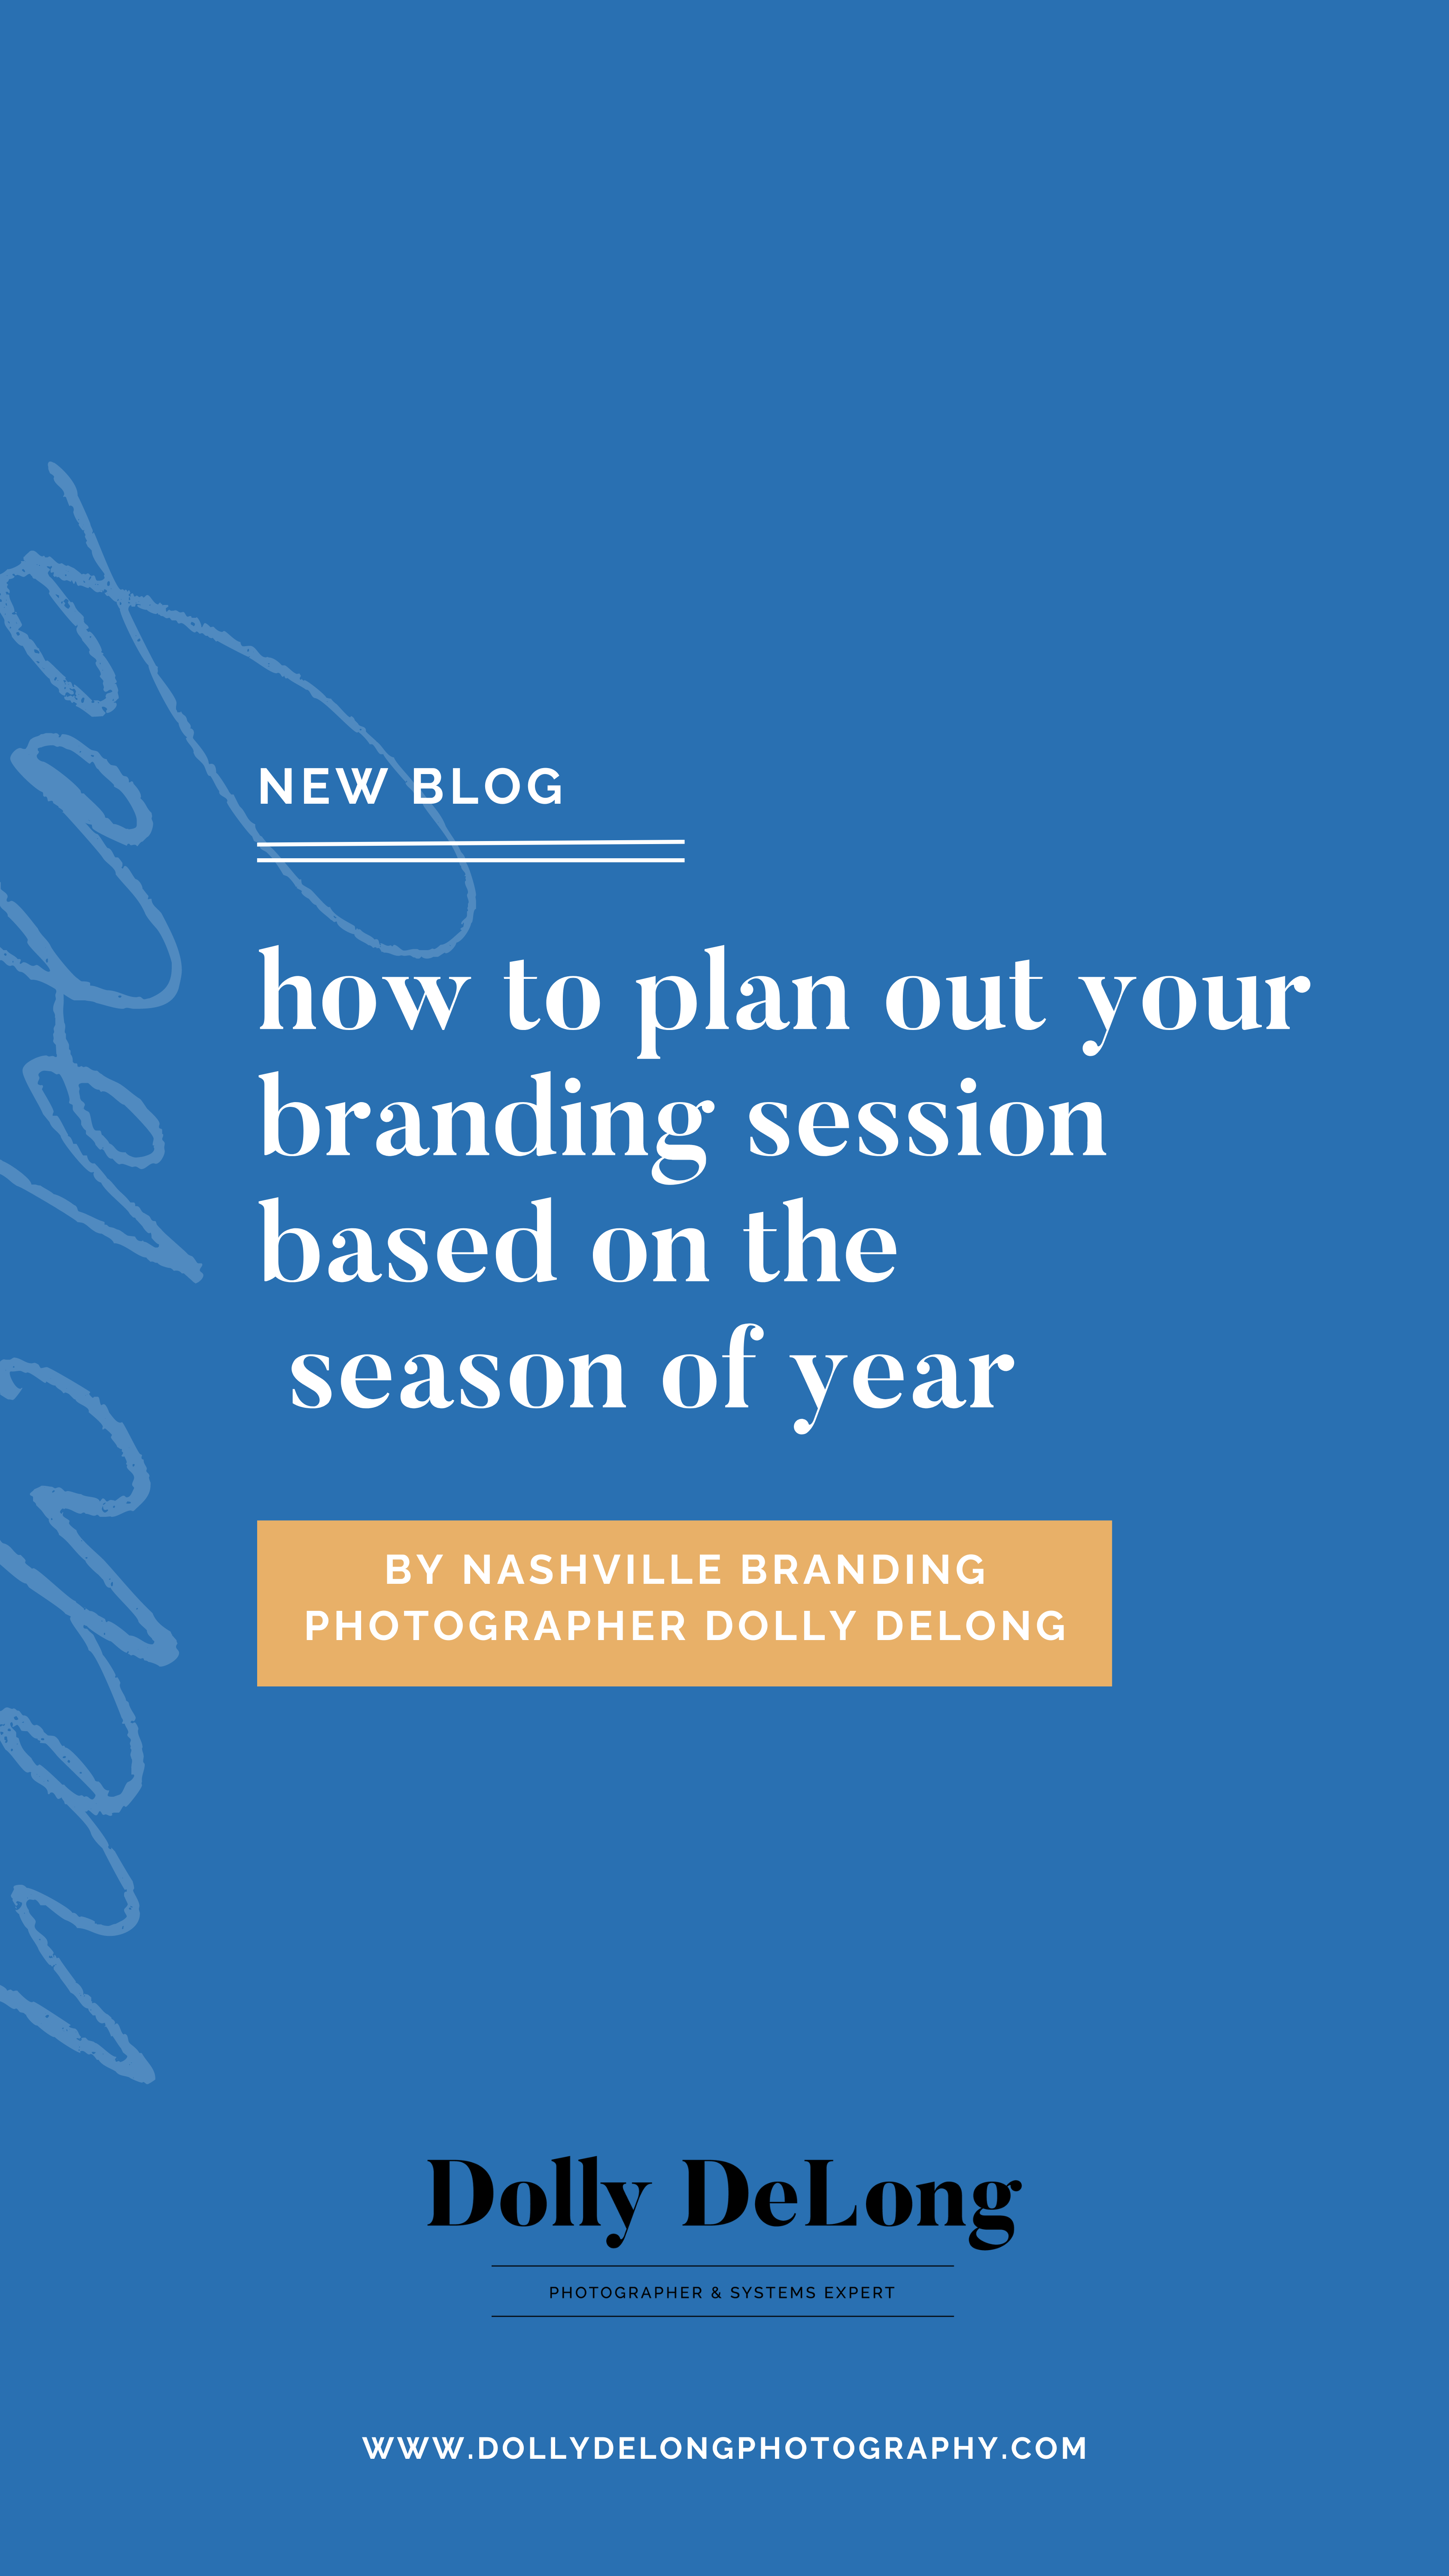 how_to_plan_out_your_branding_session_based_on_the_time_of_year_by_nashville_branding_photographer_Dolly_DeLong